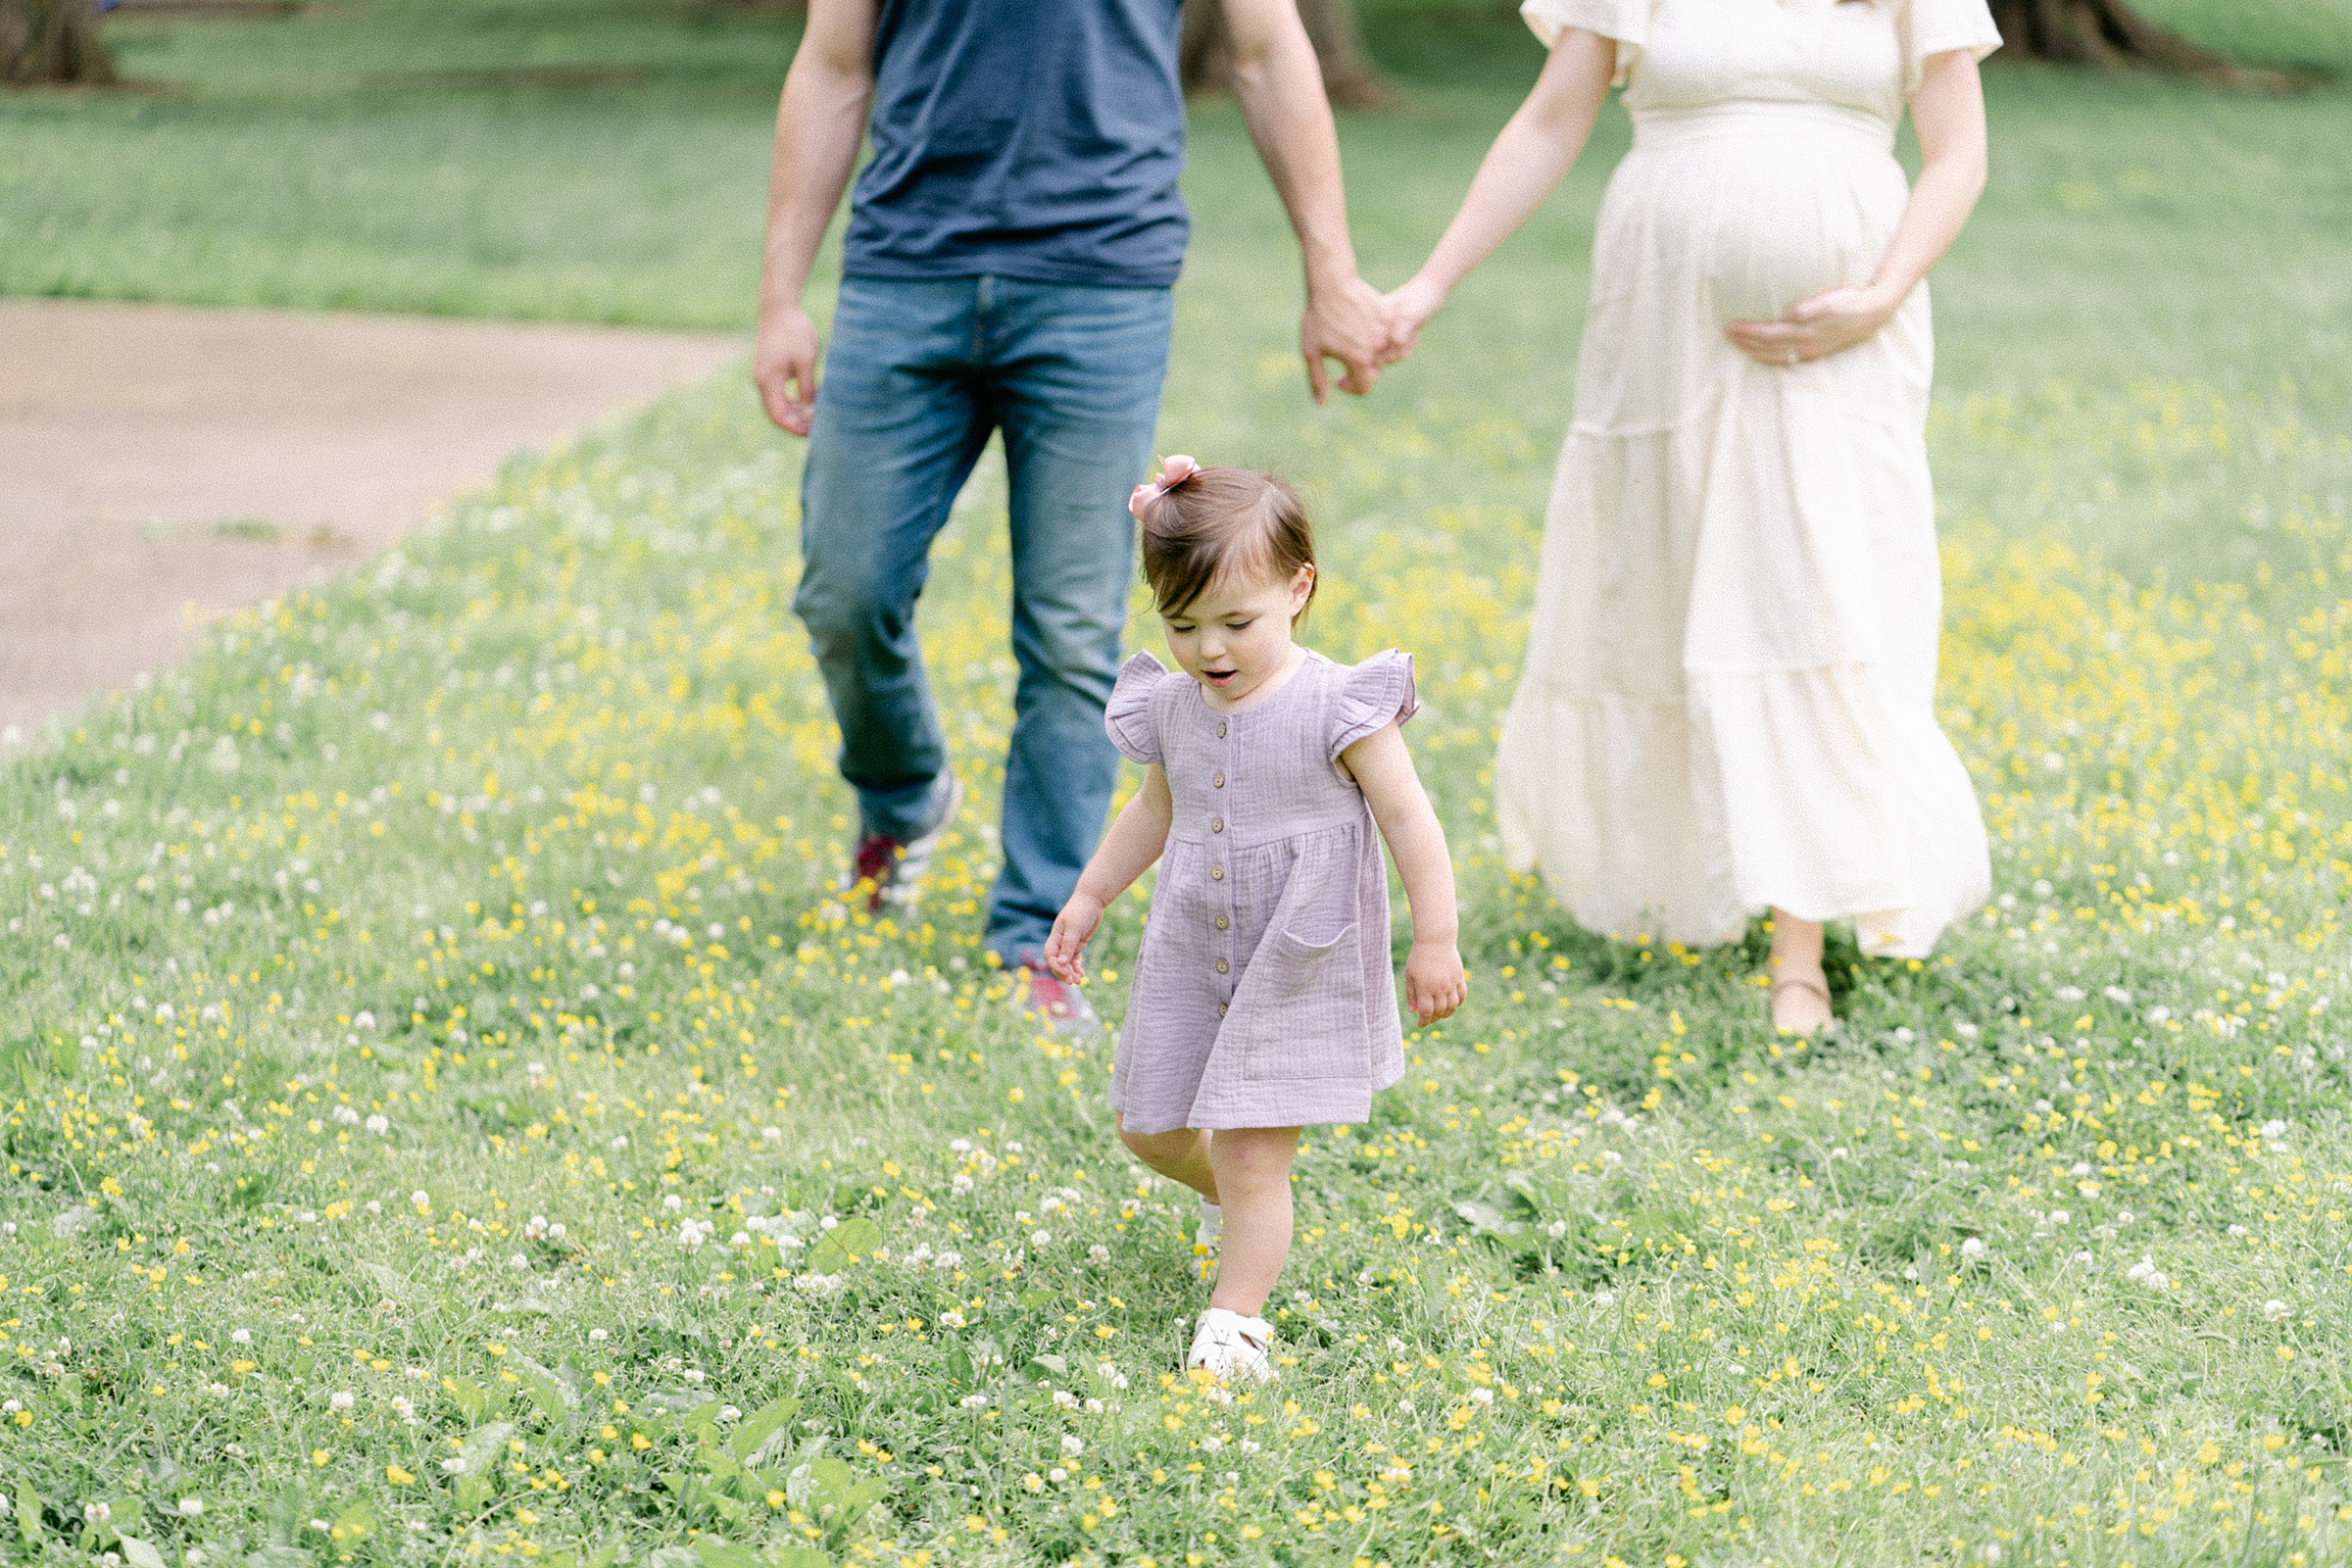 daughter walks ahead of mom and dad holding hands